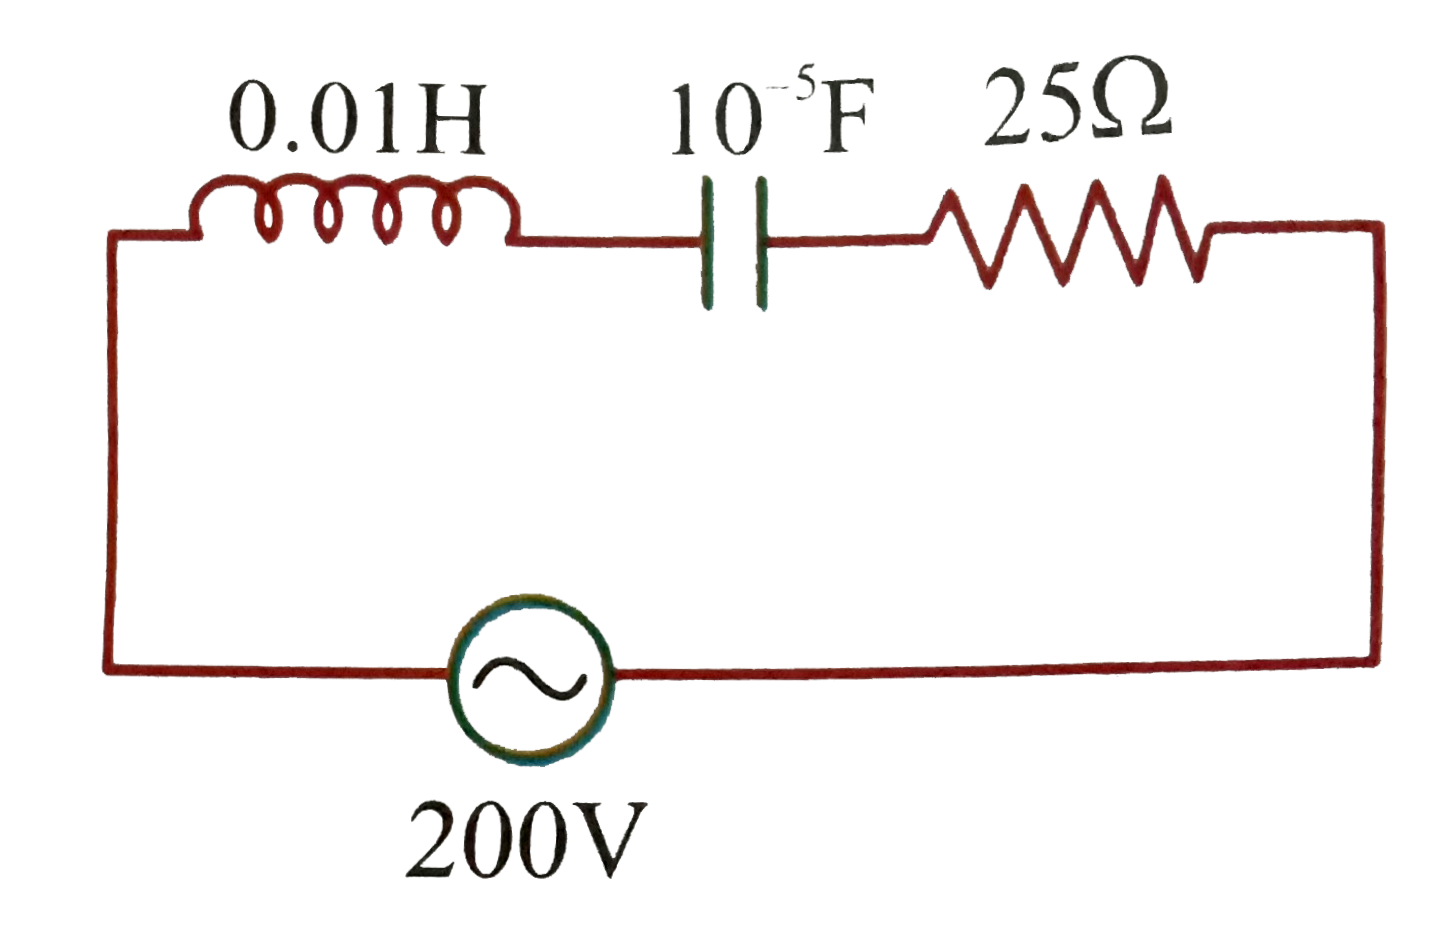 In the following circuit, the value of current flowing in the circuit at f = 0 and f = oo will respectively be